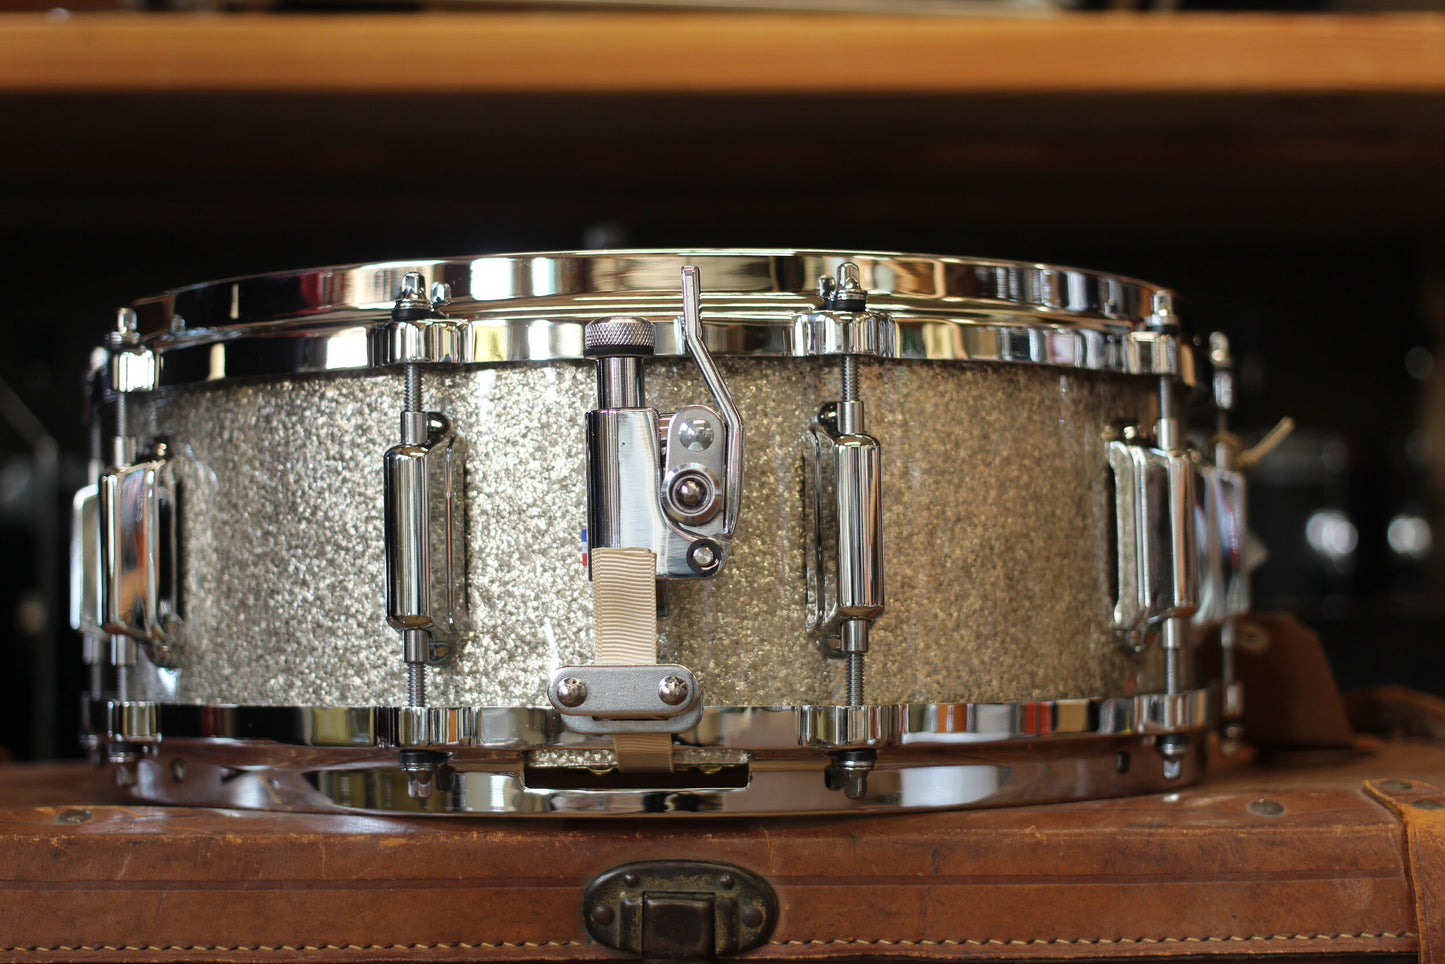 ASBA Drums 'Revelation' Snare Drum 5"x14" in Marcel Blanche Sparkle